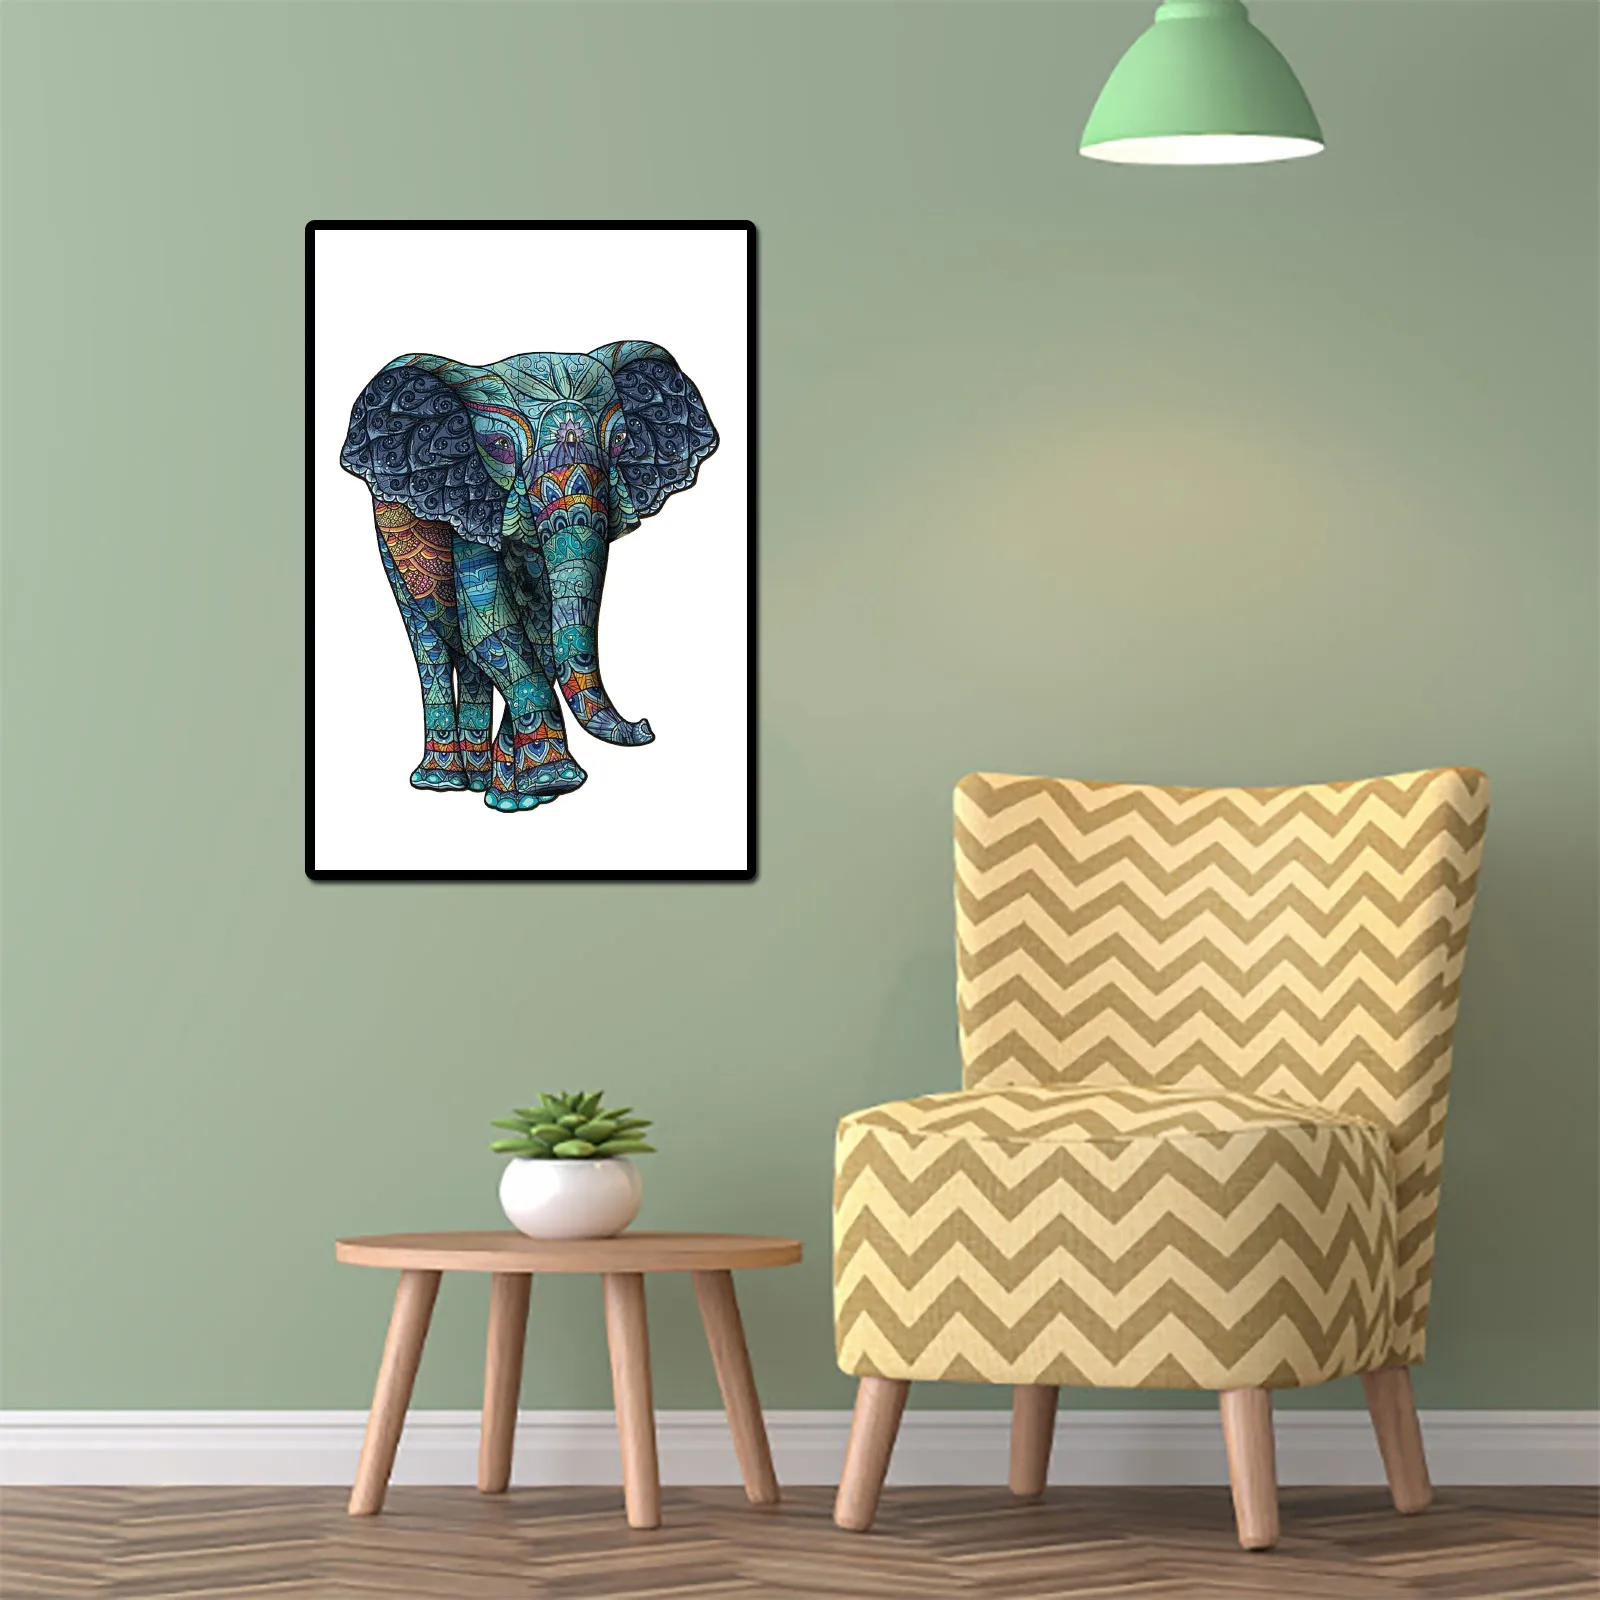 

Elephant Tribal Wooden Jigsaw Puzzle Unique Shape Pieces Animal For Adults And Children Puzzles Christmas Gifts For Kids Toys